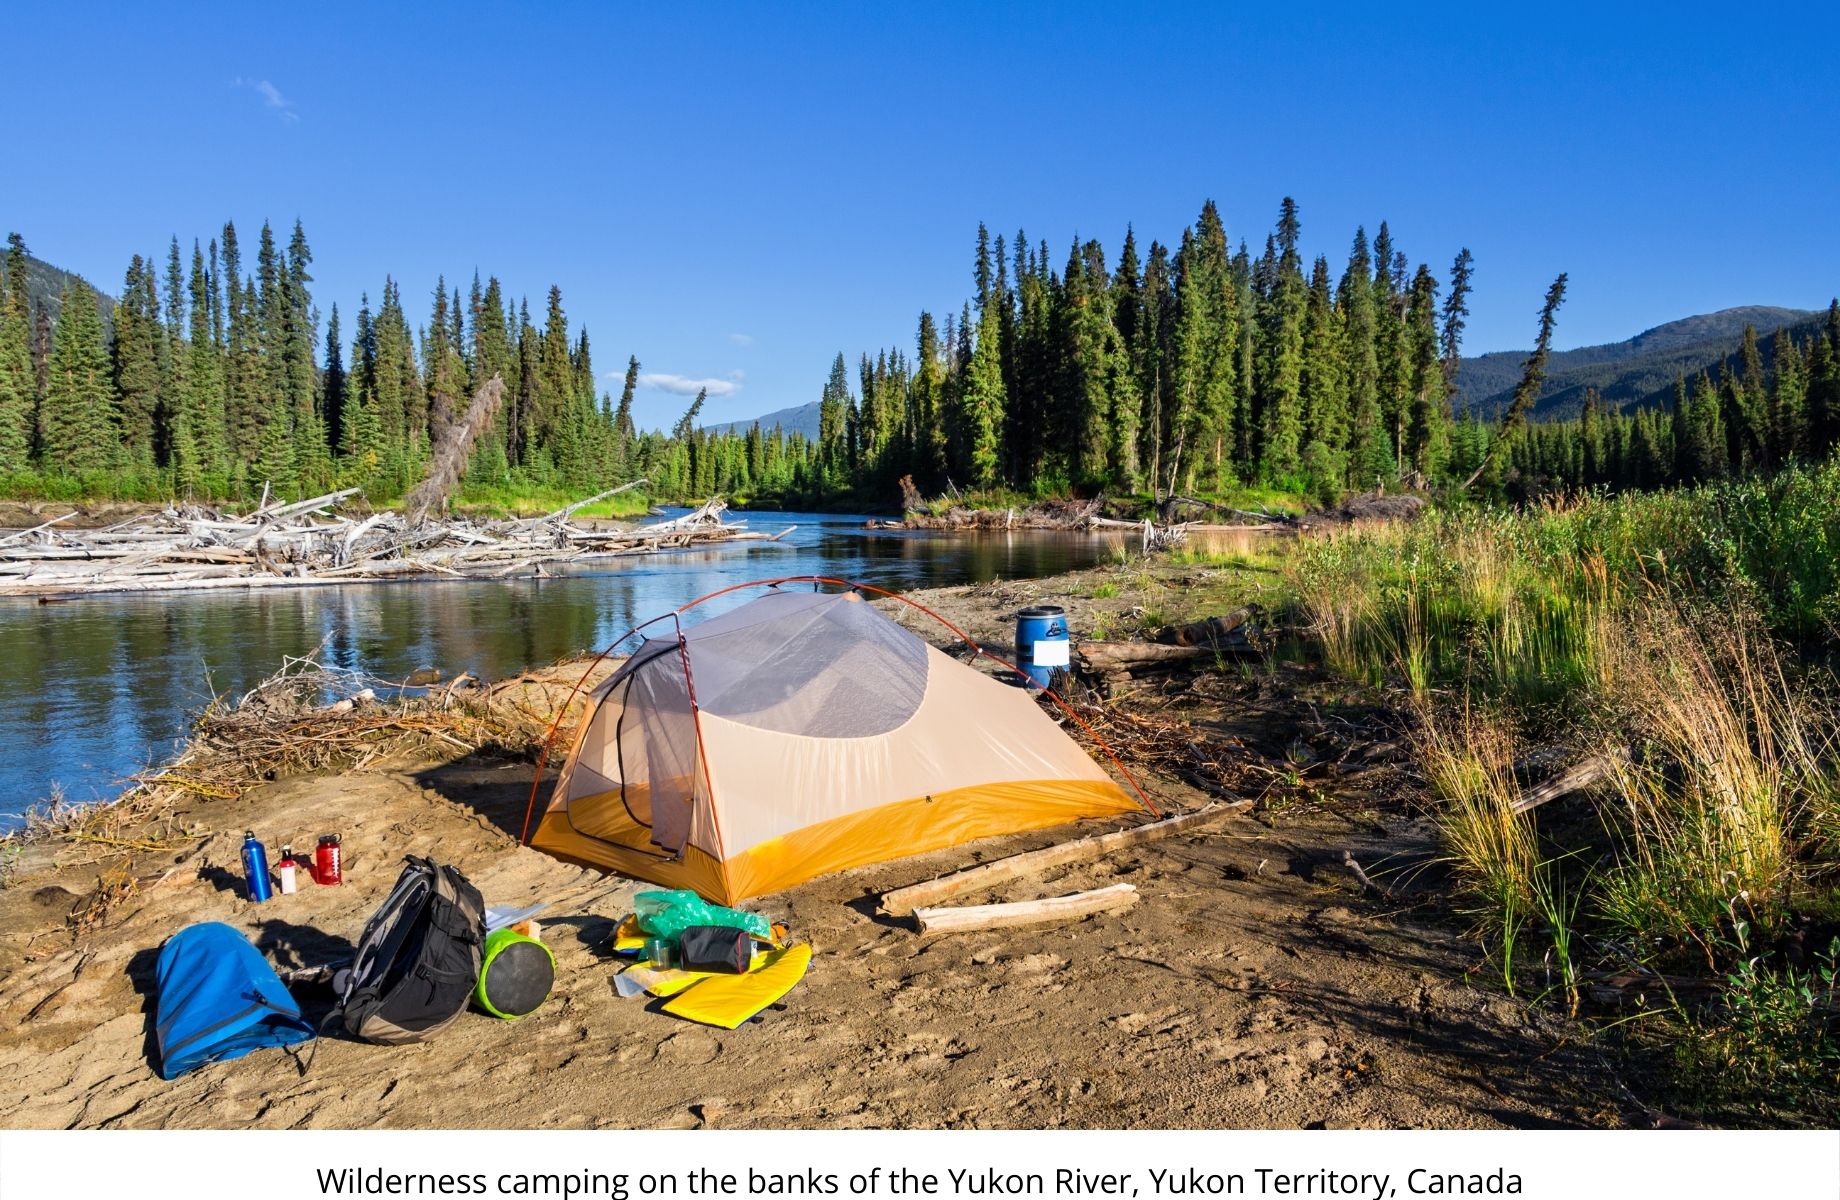 Wilderness camping on the banks of the Yukon River, Yukon Territory, Canada